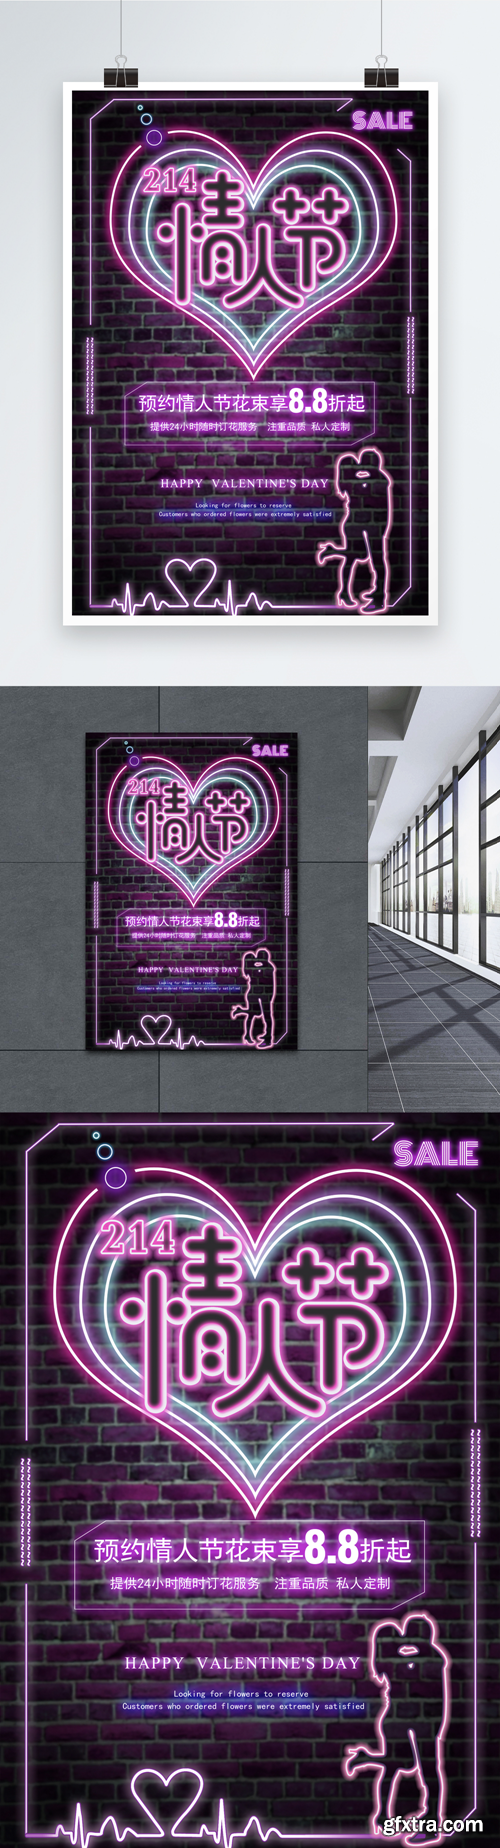 neon style valentines day posters